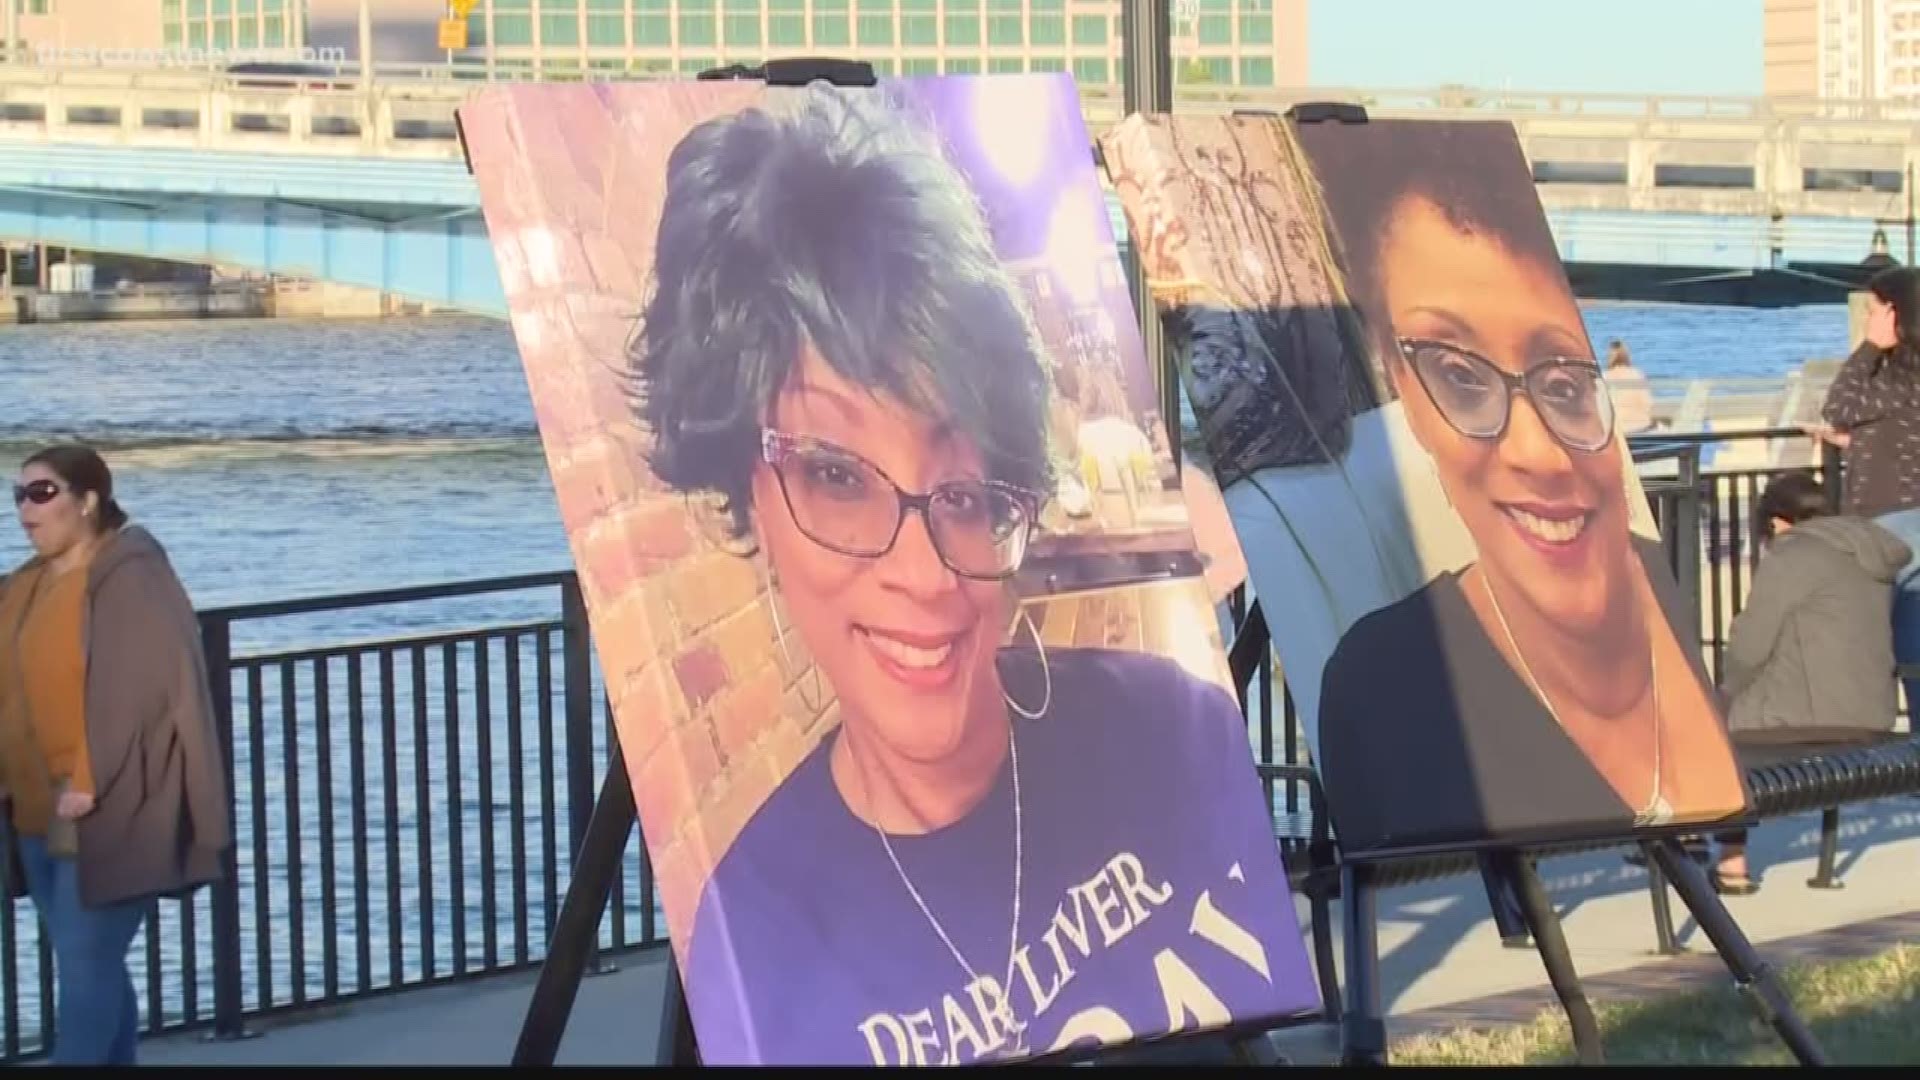 As investigators continue to search for answers in the death of Vivian James, friends, family and students held a vigil to remember the late teacher.